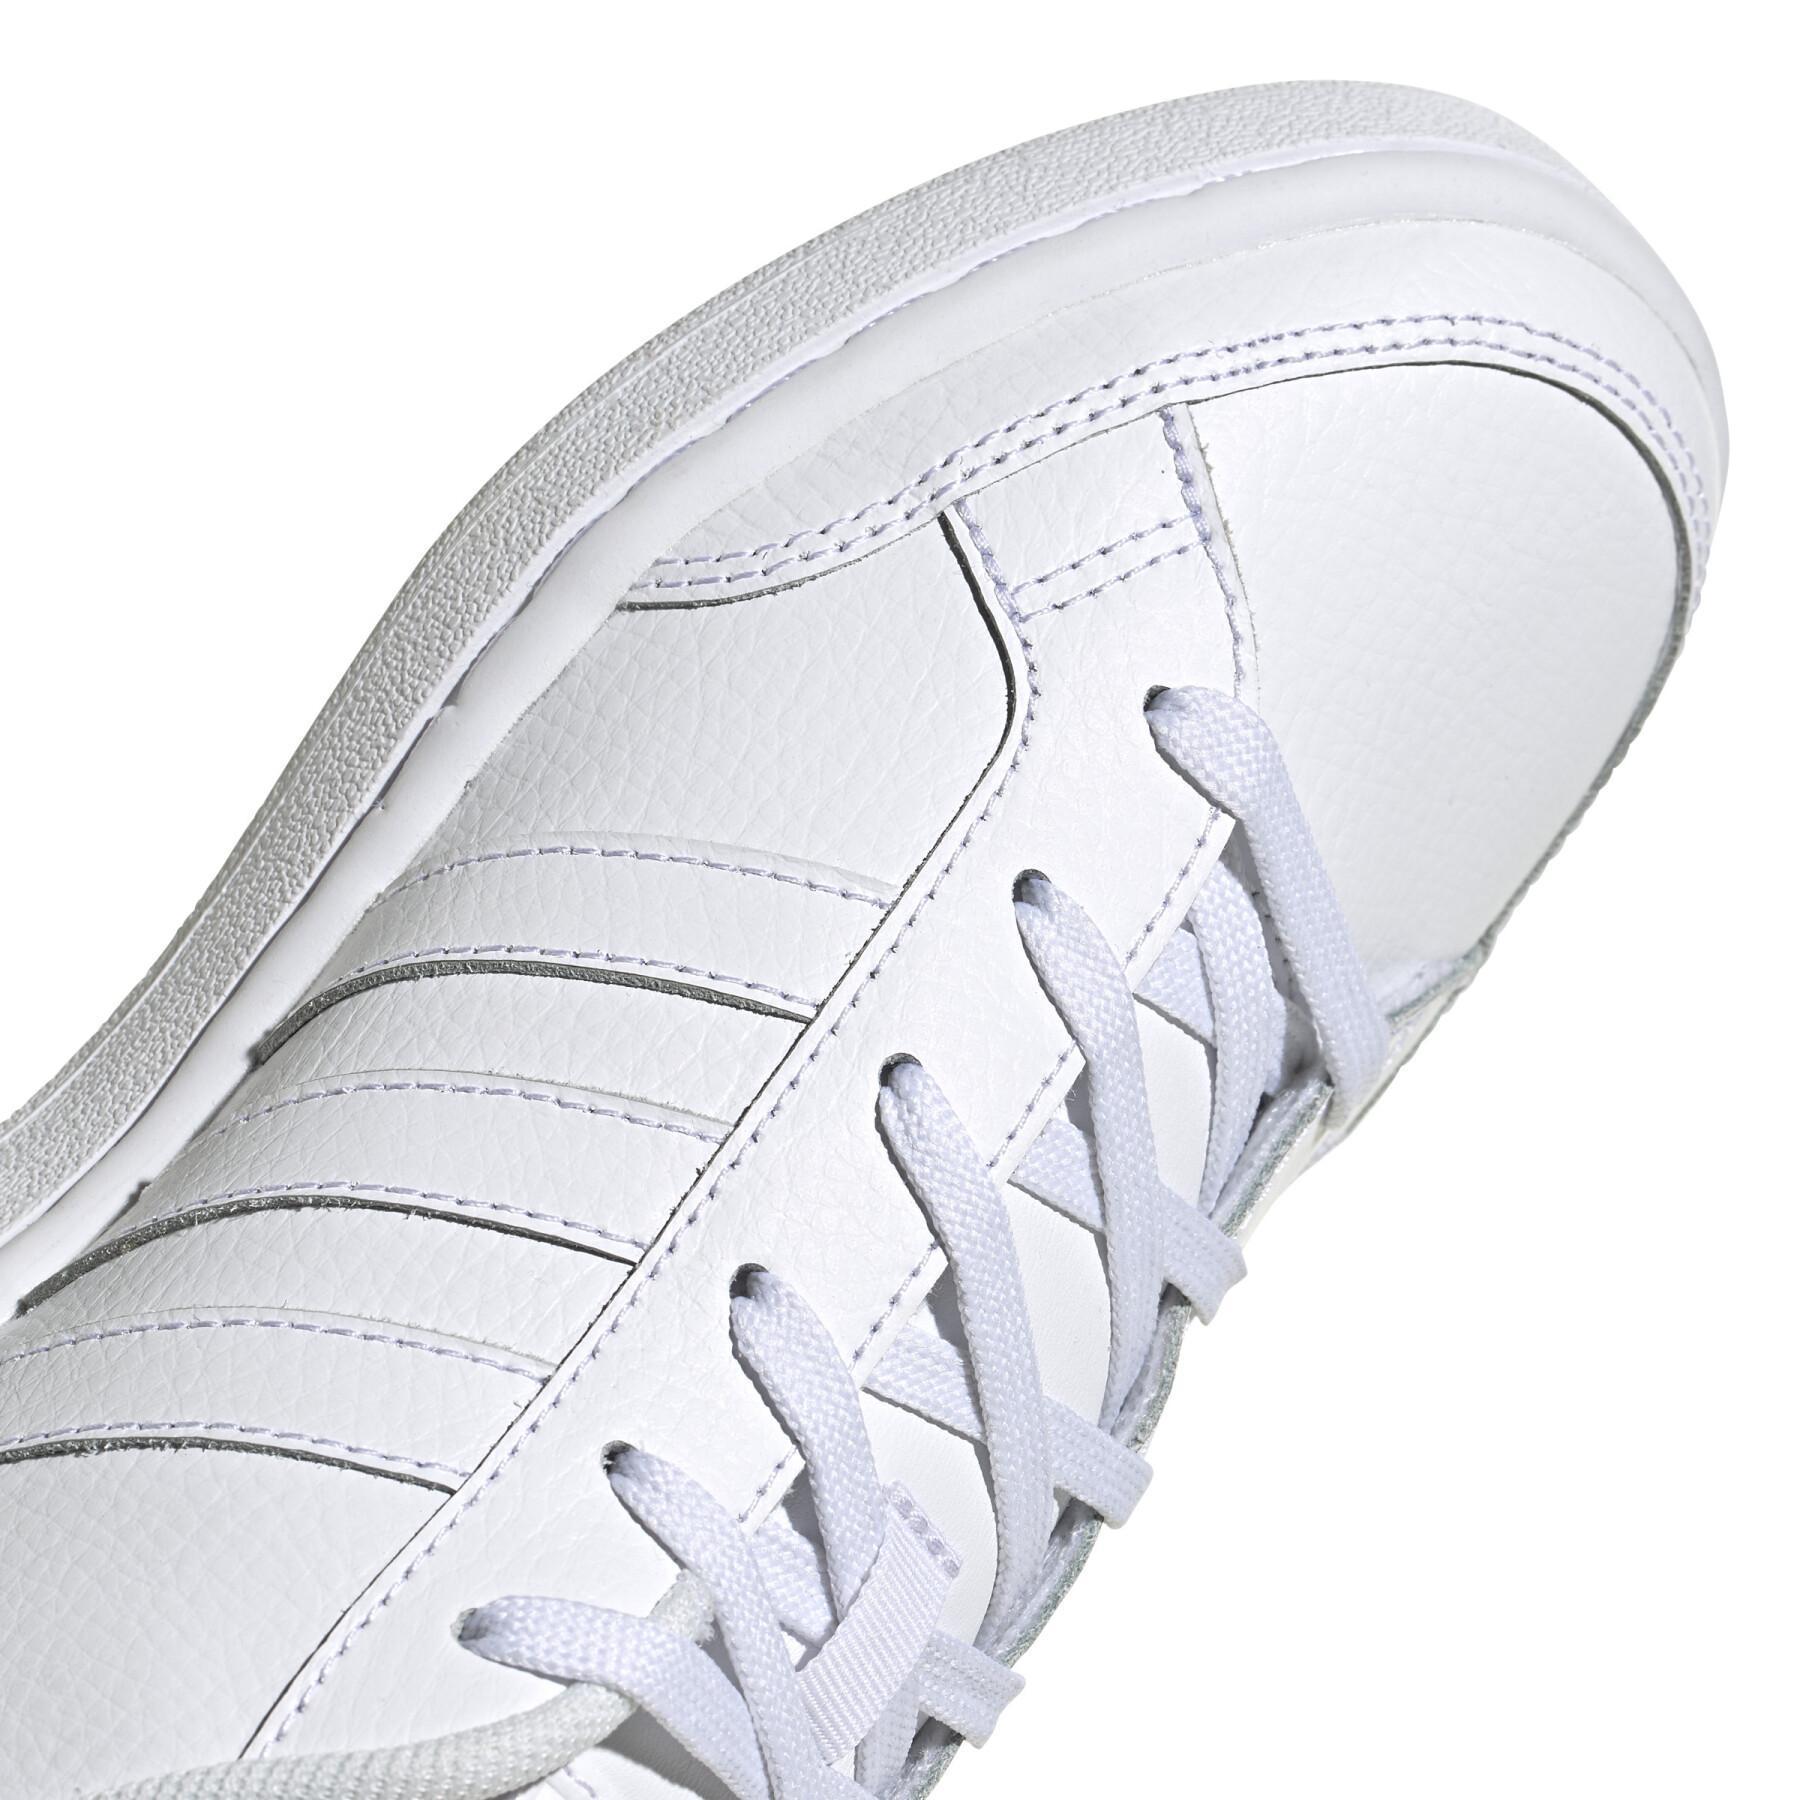 Sneakers adidas Grand Court SE